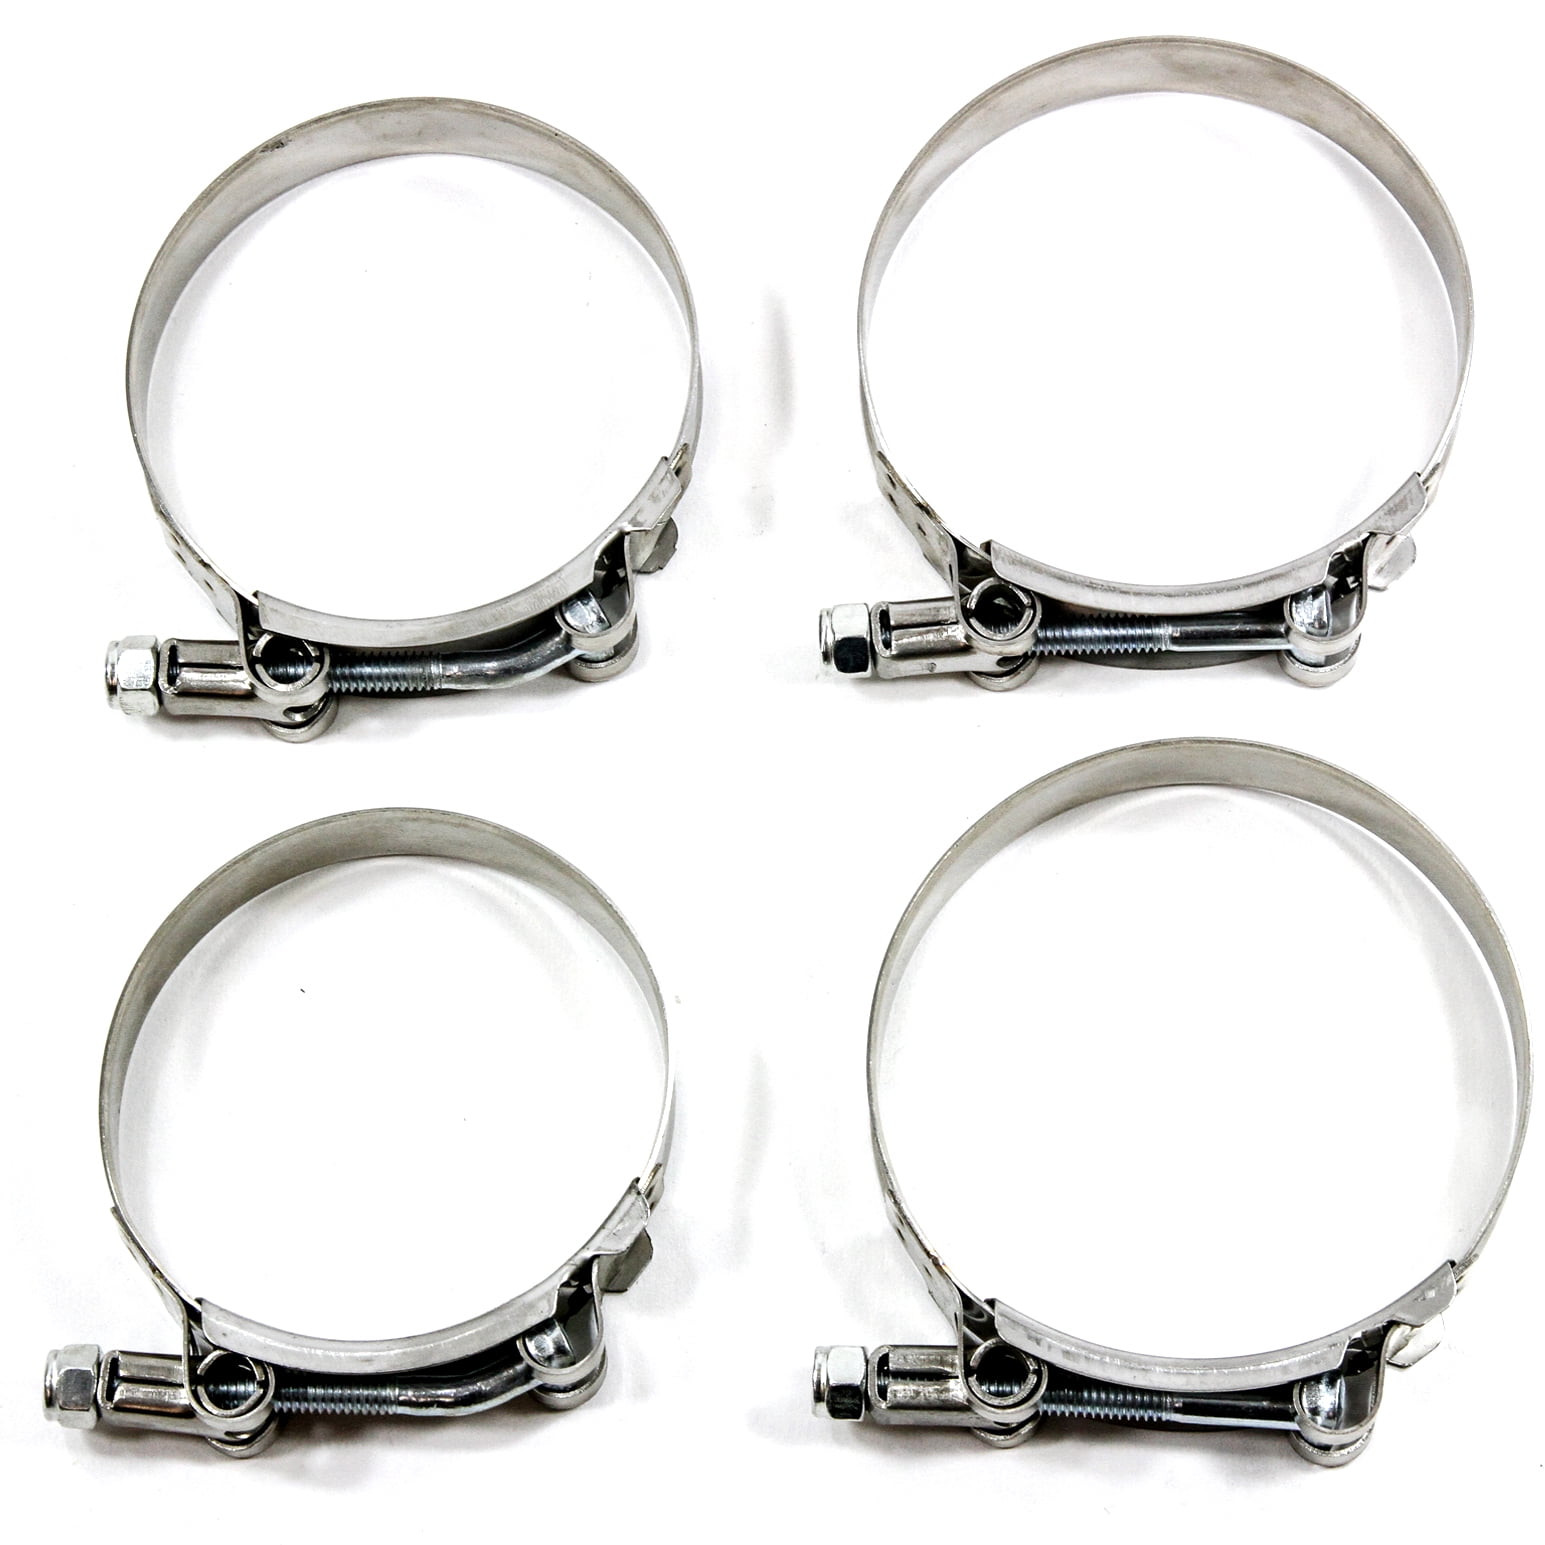 NEW 40 PC STAINLESS METAL STEEL HOSE CLAMPS ASSORTMENT KIT VARIETY HOSE CLAMP 